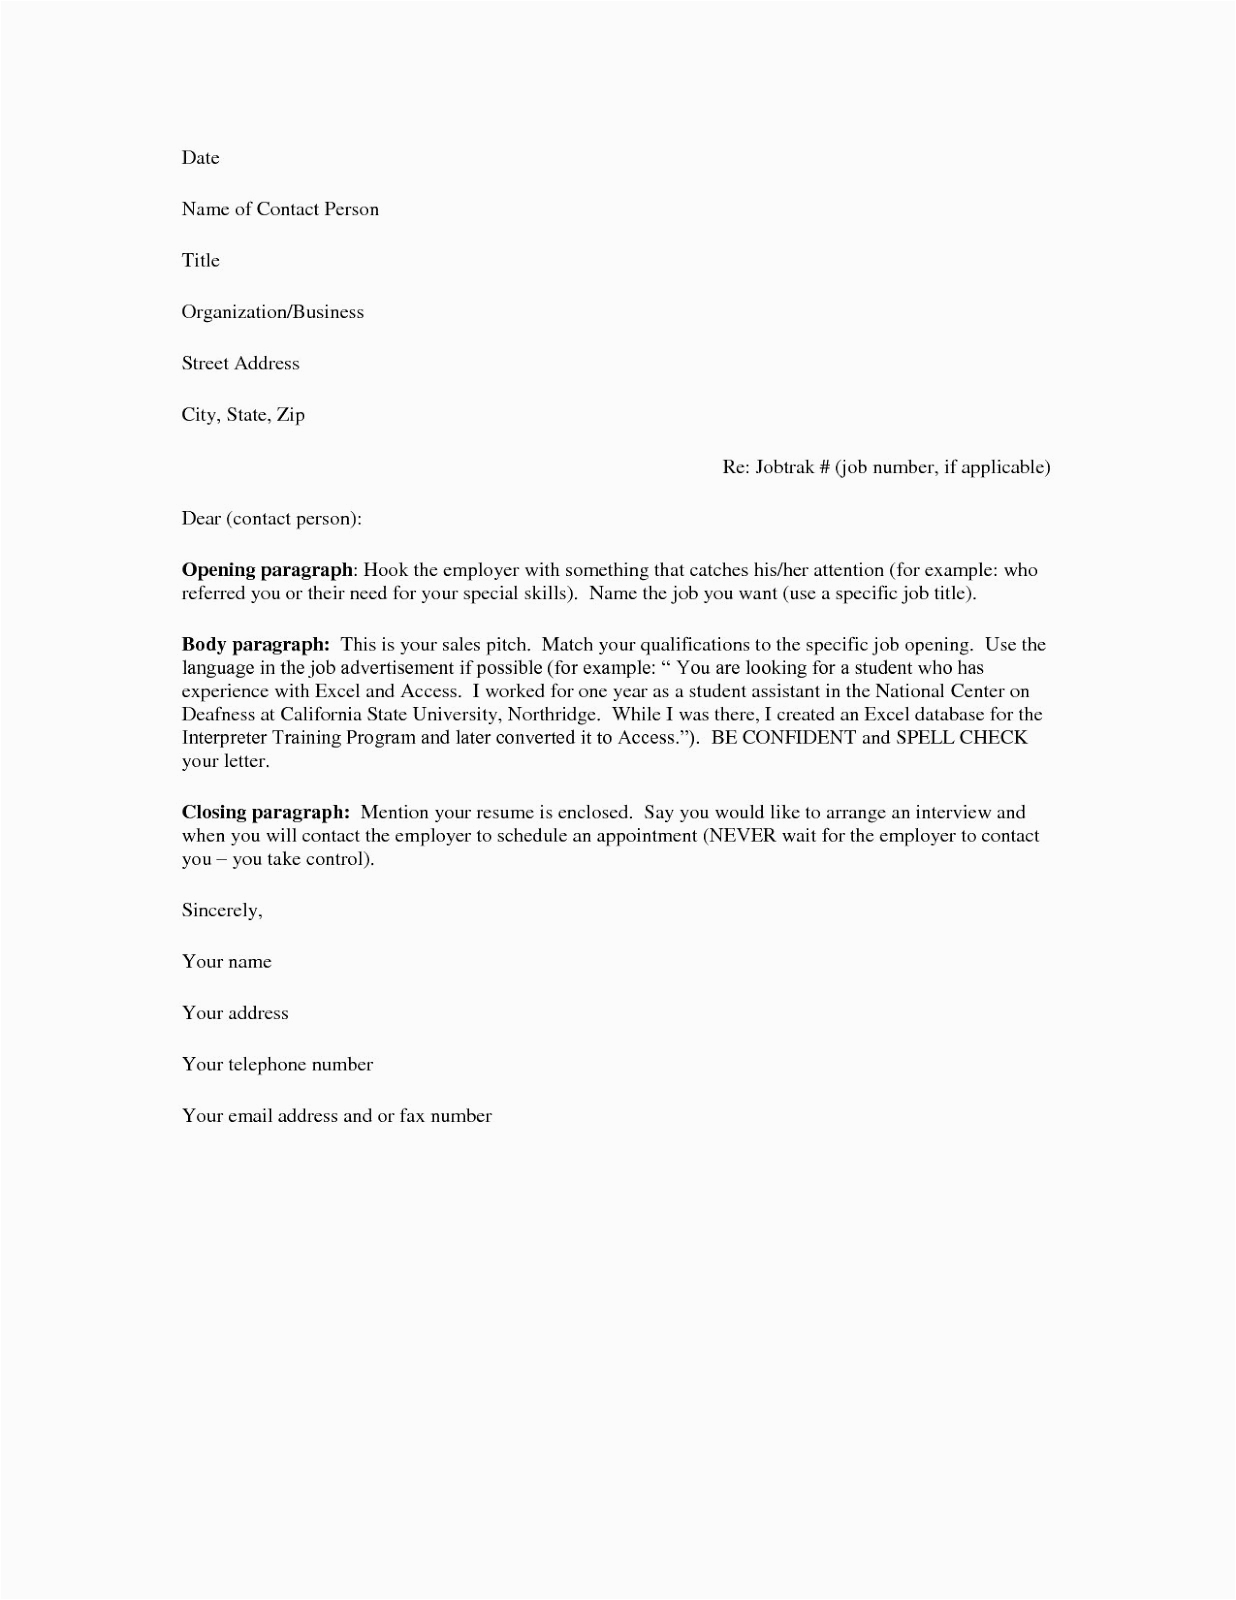 Free Sample Cover Letters for Resumes Examples Free Cover Letter Samples for Resumes